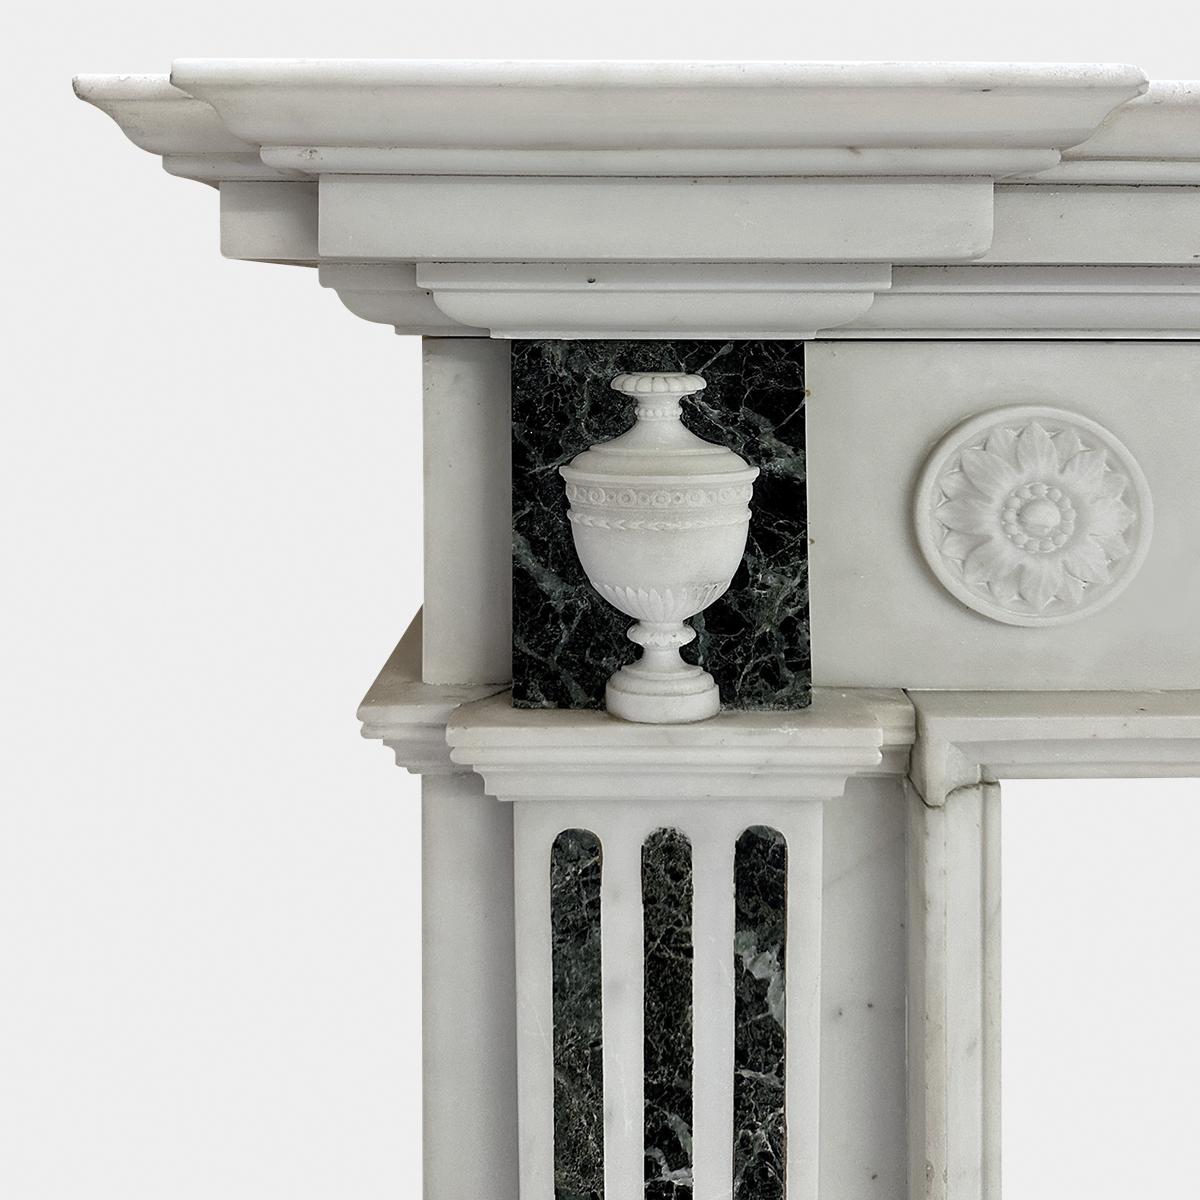 An antique mid 19th century George II style Statuary marble with Tinos Green marble inlay. A good quality surround with delicate carvings and well proportioned. The tiered breakfront shelf above a running frieze of carved rosettes and stop flute